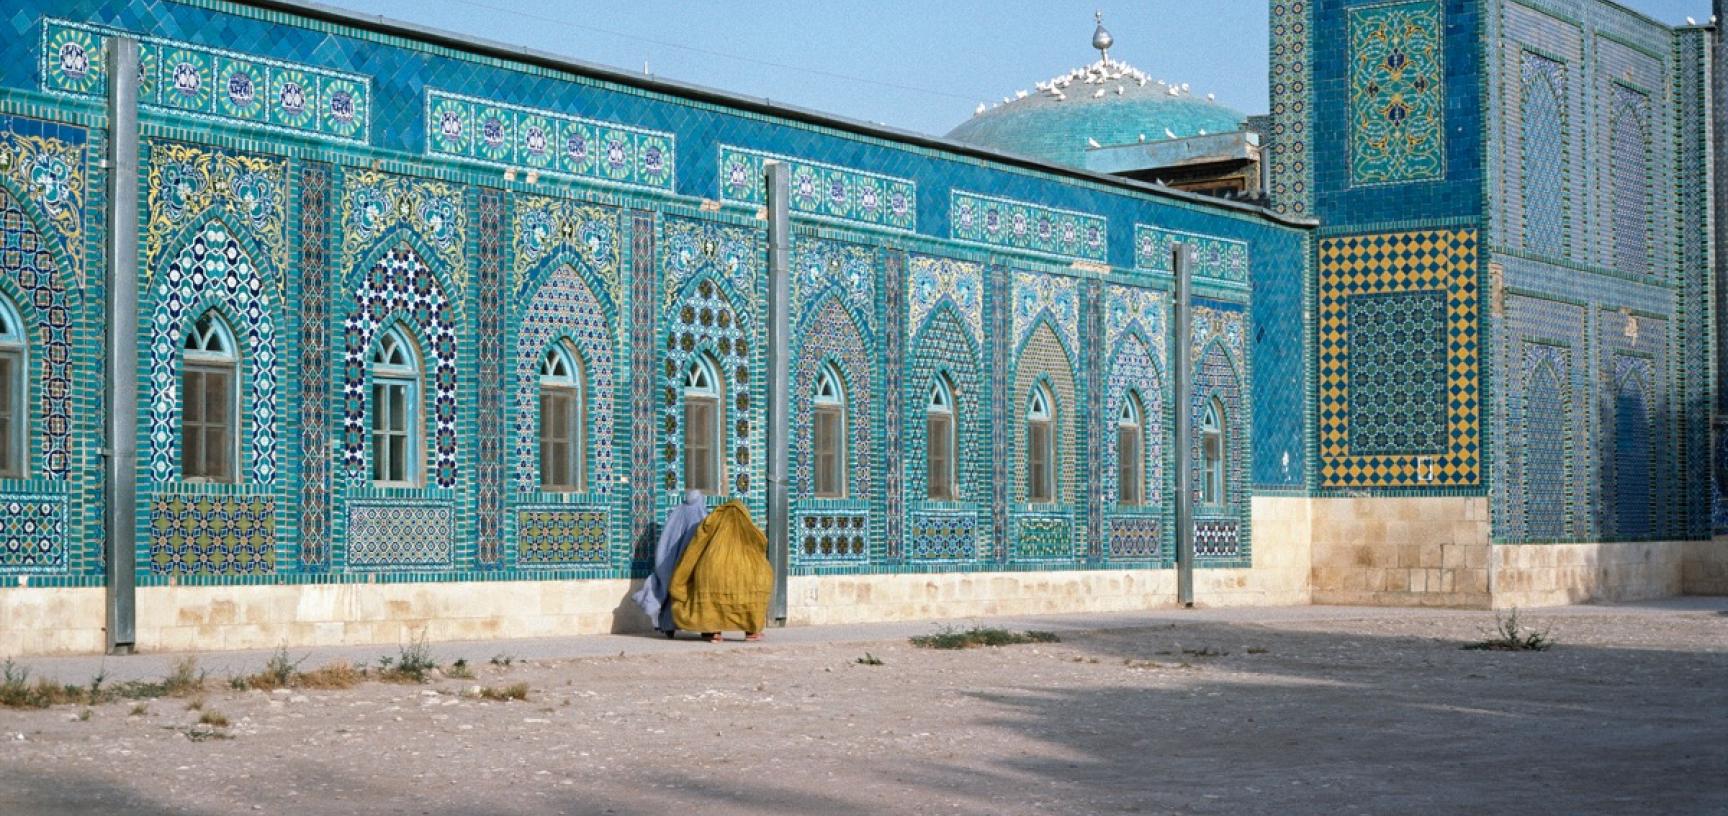 Two women in burqas walking near a brightly decorated blue mosque